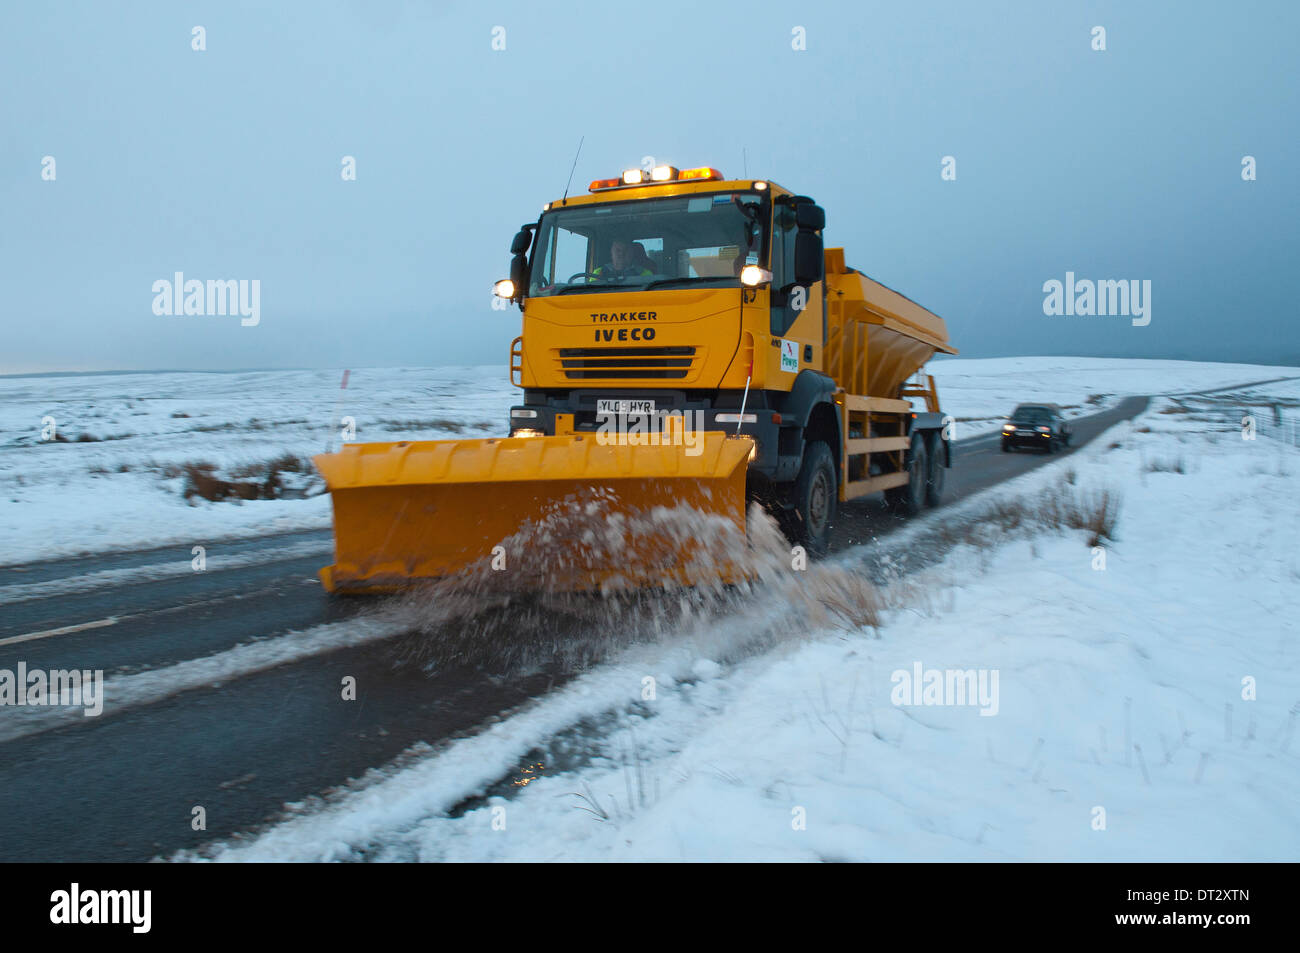 Mynydd Epynt, Powys, Wales, UK. 7th February 2014. Gritting trucks are out early on the road between Builth Wells and Brecon. Snow fell last night on high land in Mid-Wales. Credit:  Graham M. Lawrence/Alamy Live News. Stock Photo